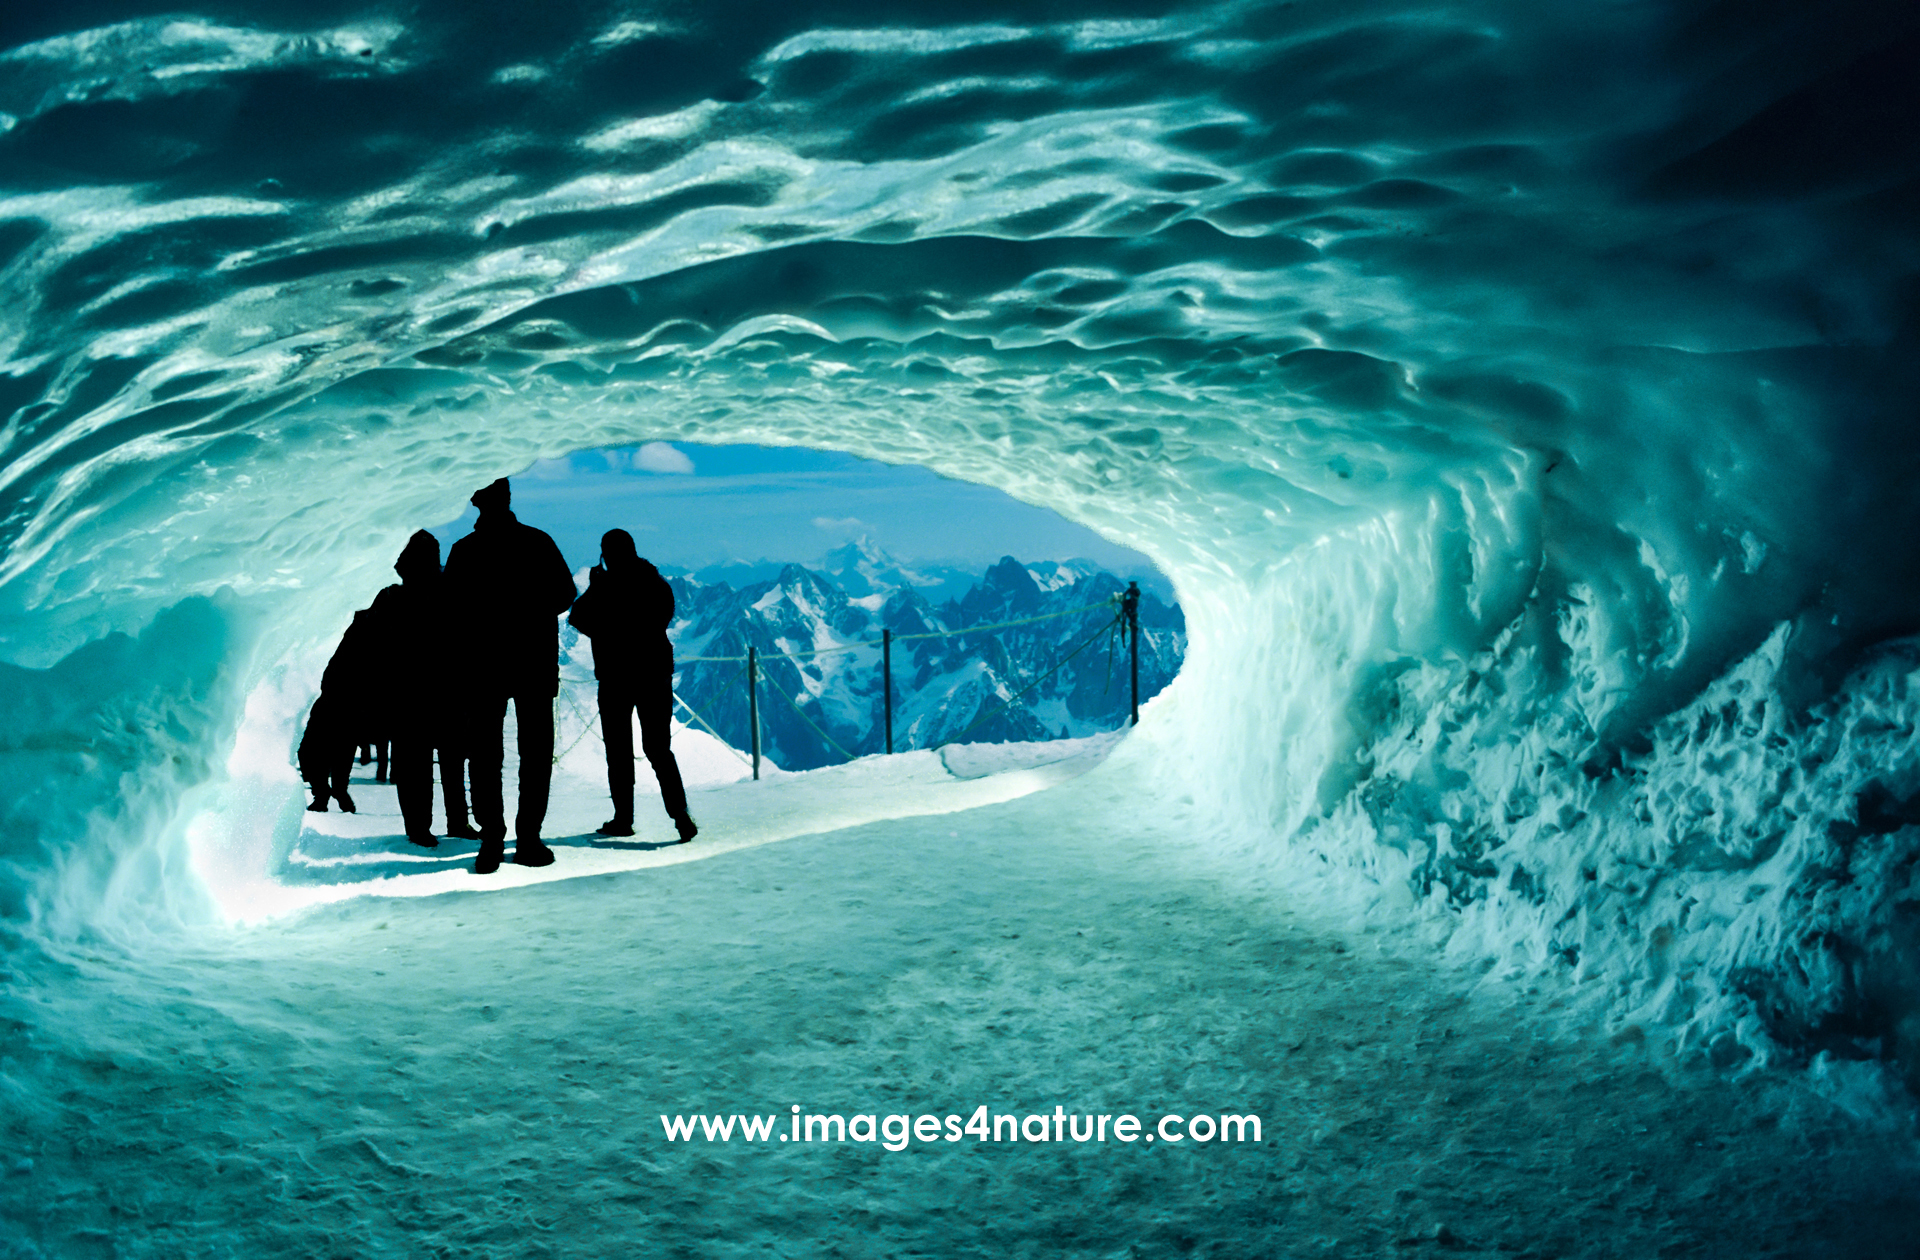 Silhouette of people at the end of a tunnel made of ice